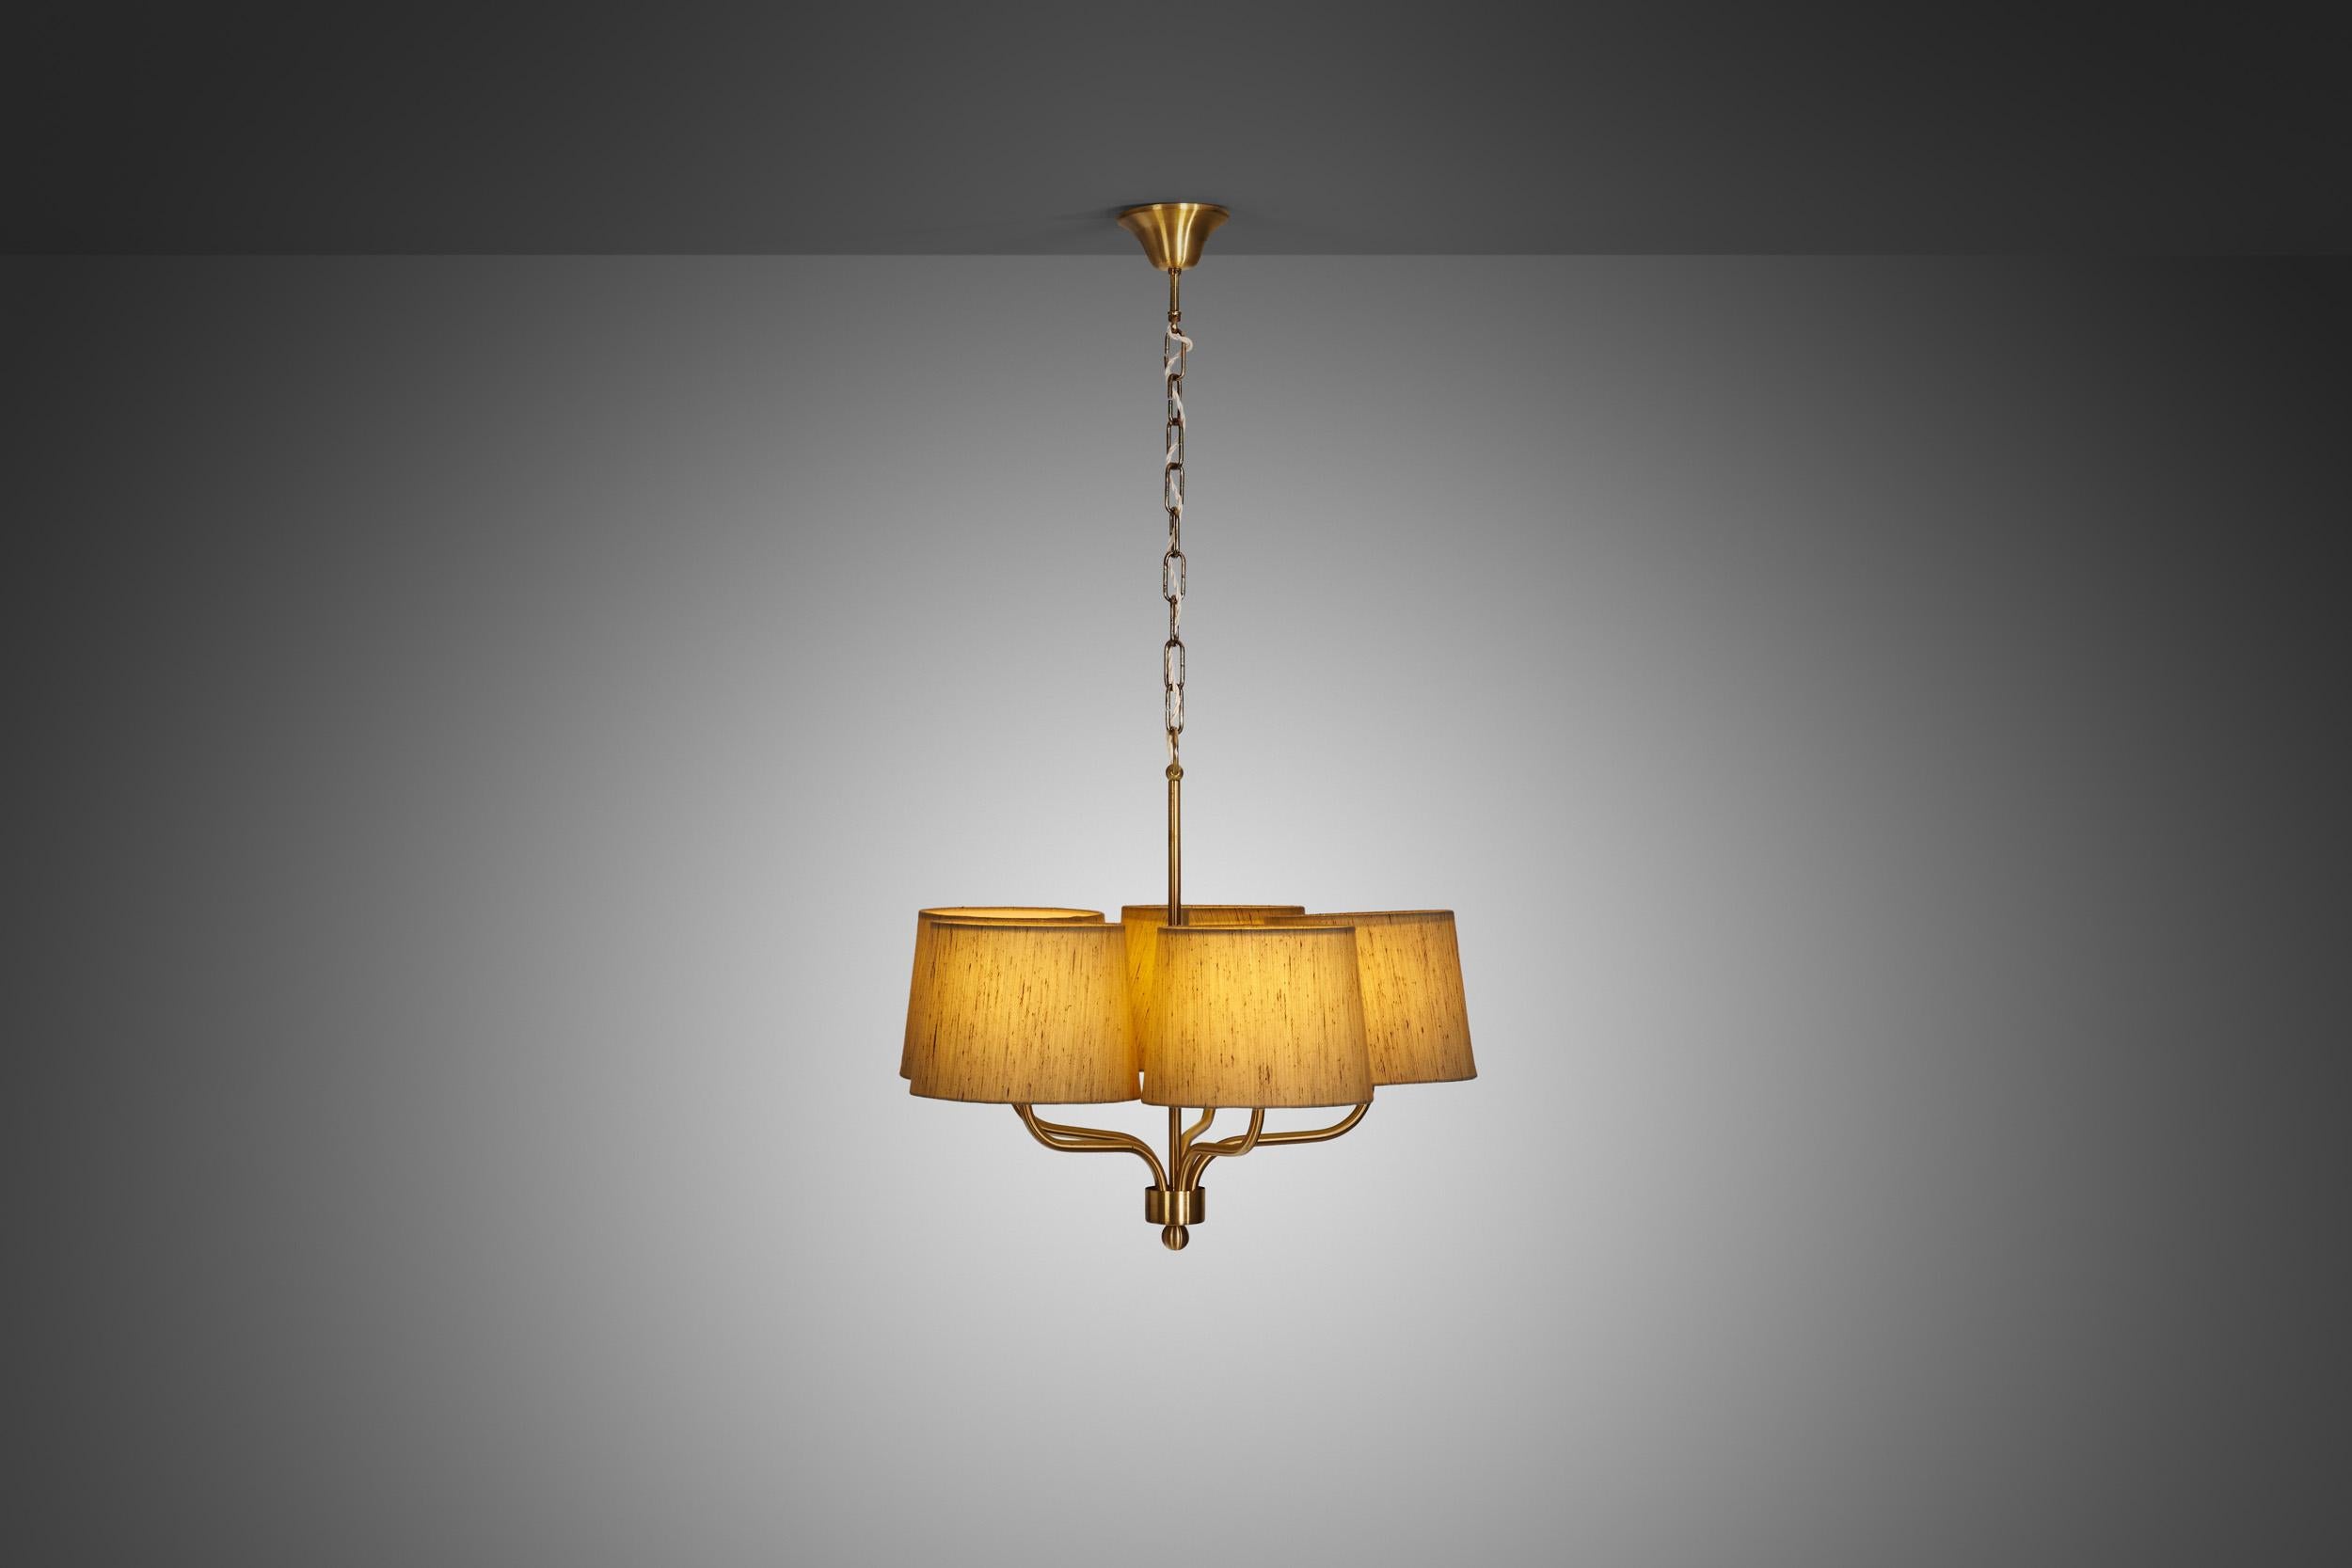 ‎‎Swedish lighting manufacturer, Luxus gave form to some of the now iconic models that define the “Swedish mid-century style”. This brass five-light ceiling lamp was created in this “golden age of Scandinavian design”, a period that saw the revival